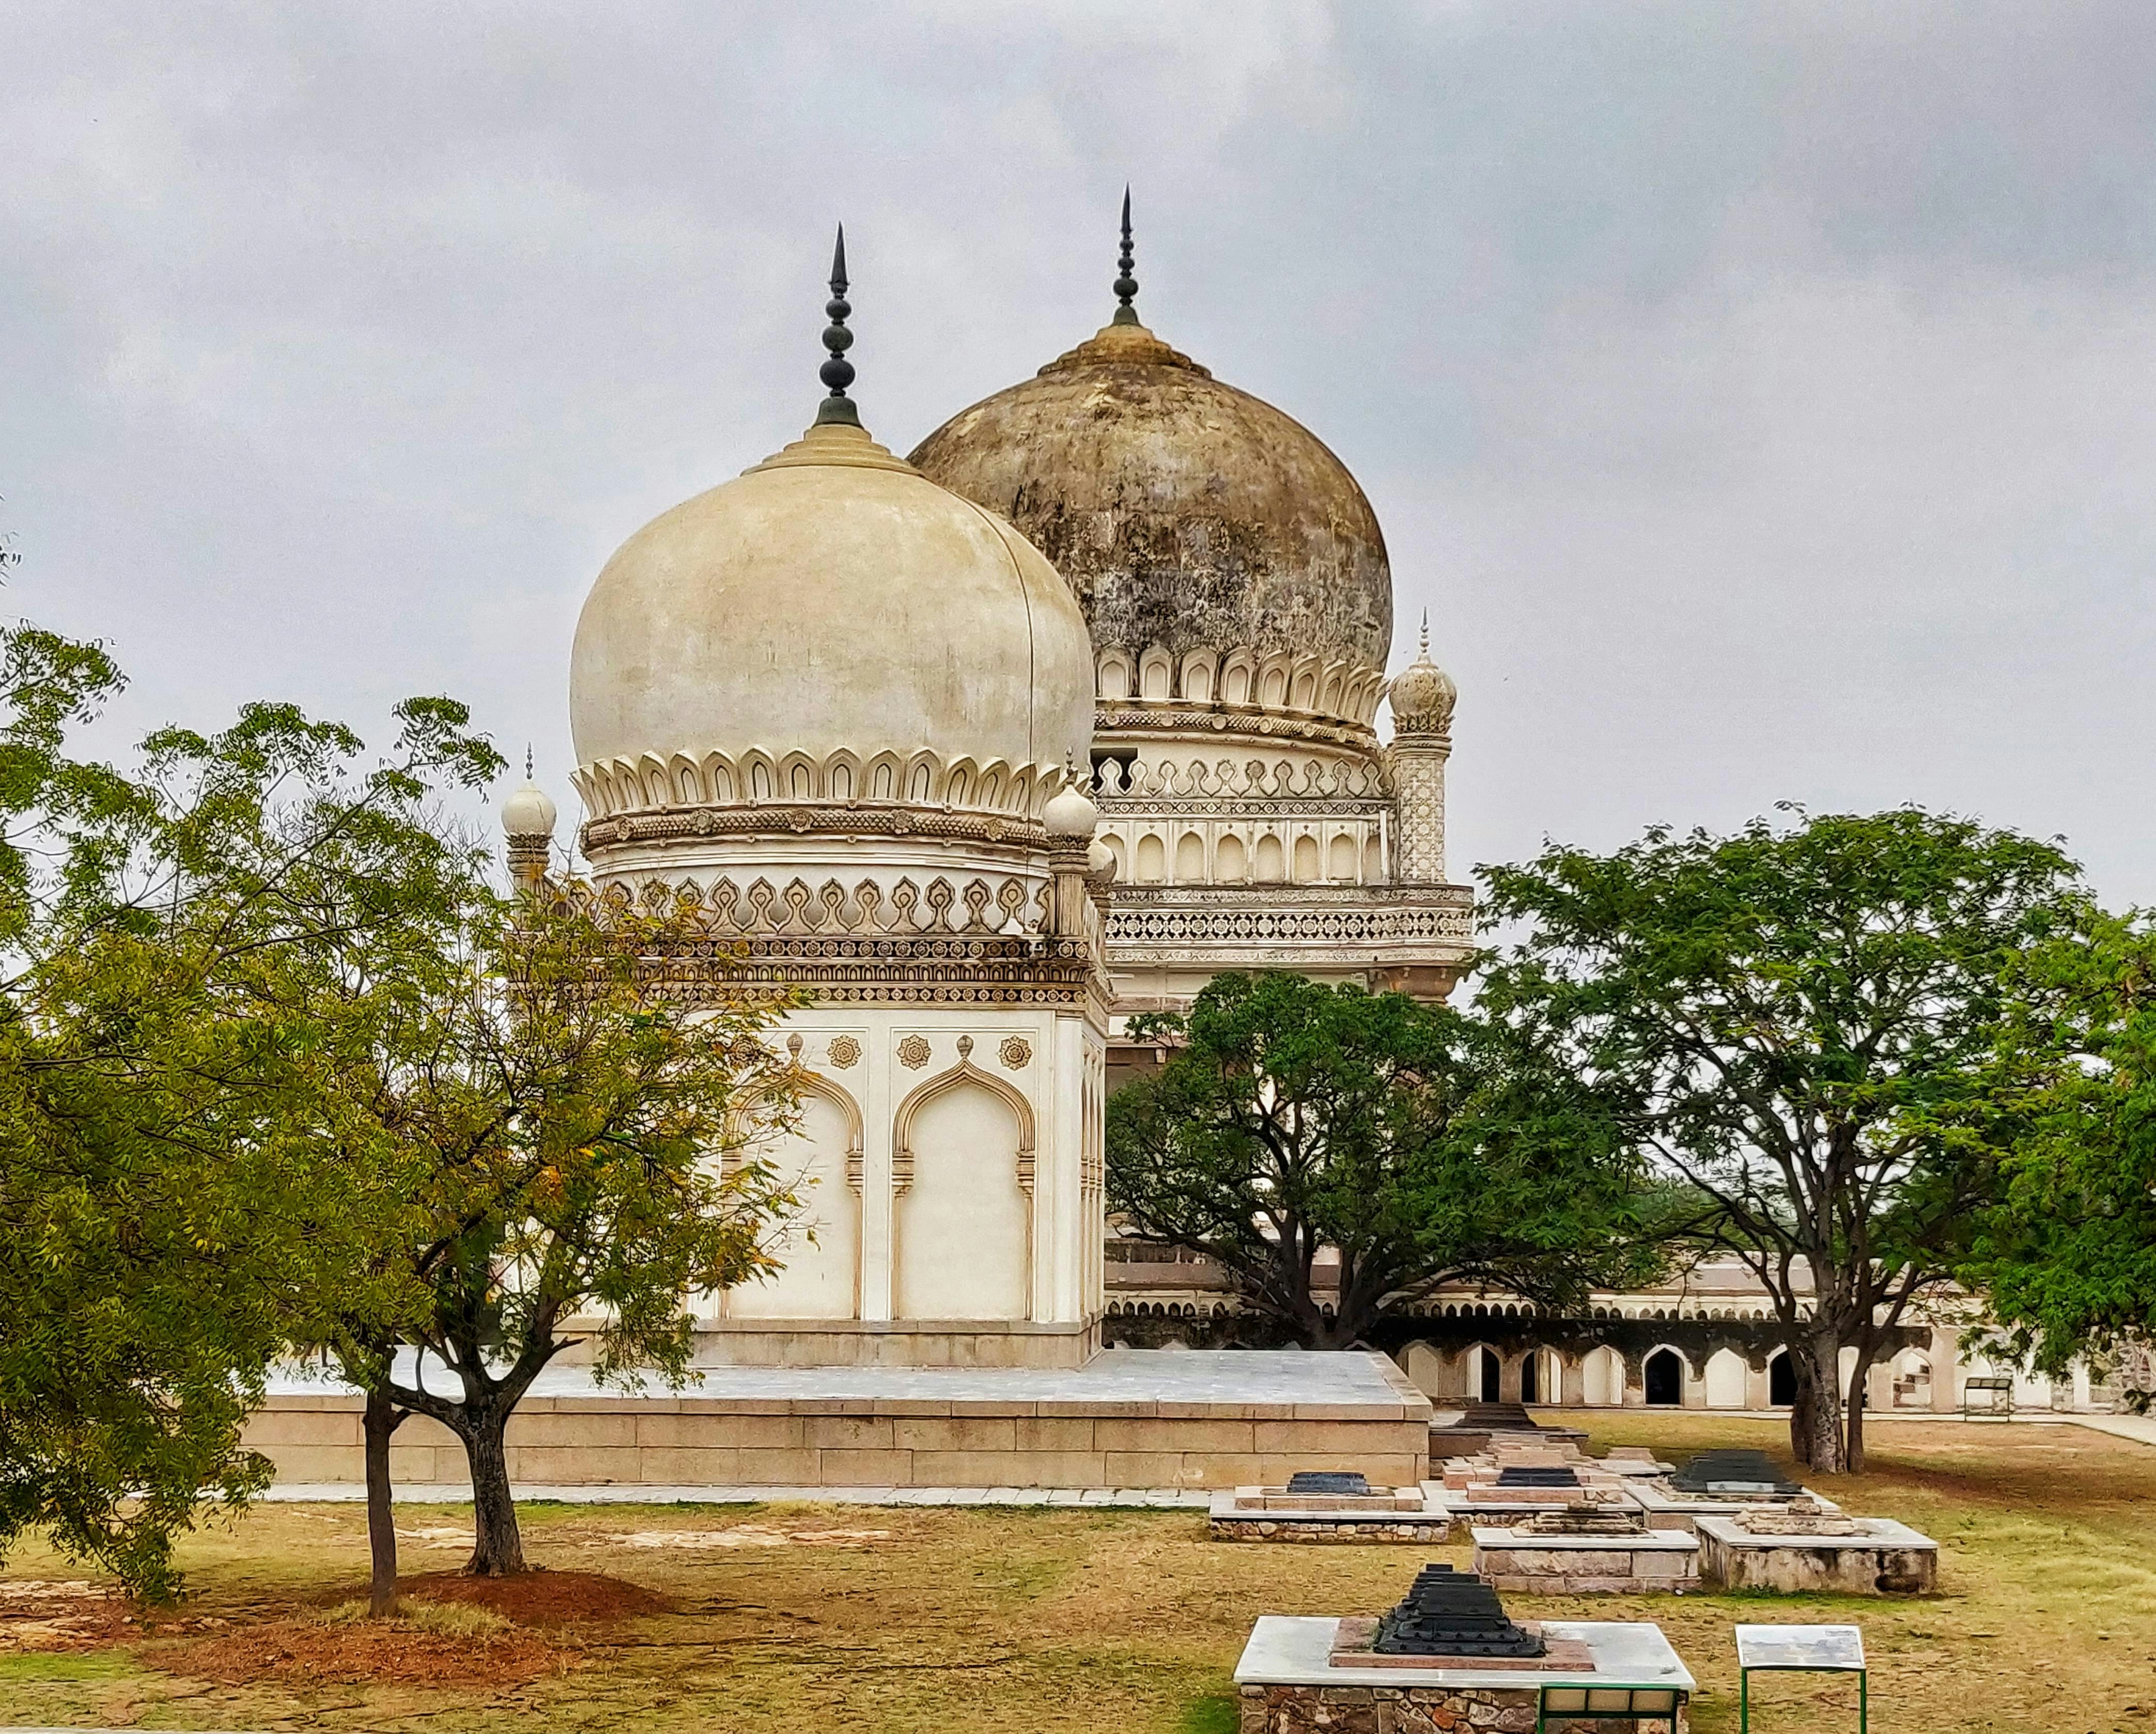 Hyderabad Travel Guide